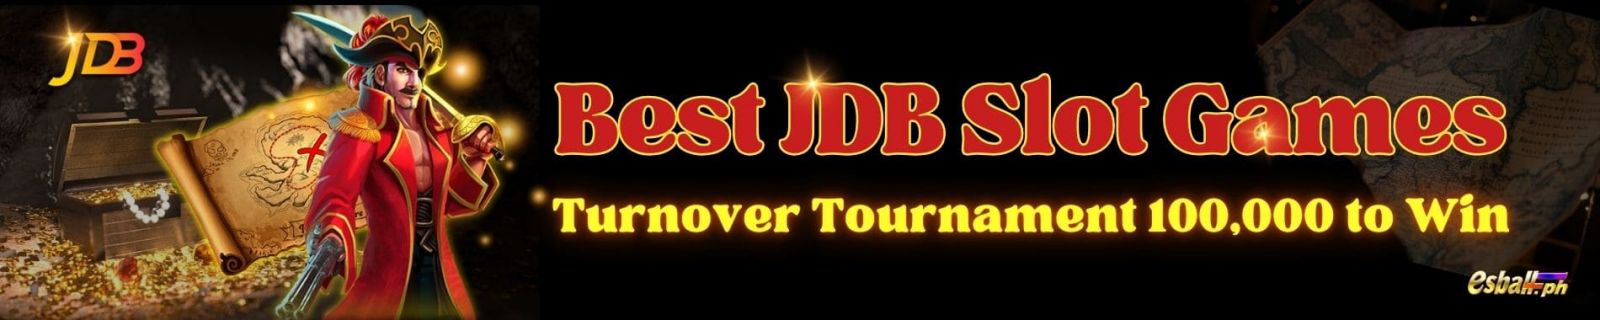 Best JDB Slot Games Turnover Tournament 100,000 to Win